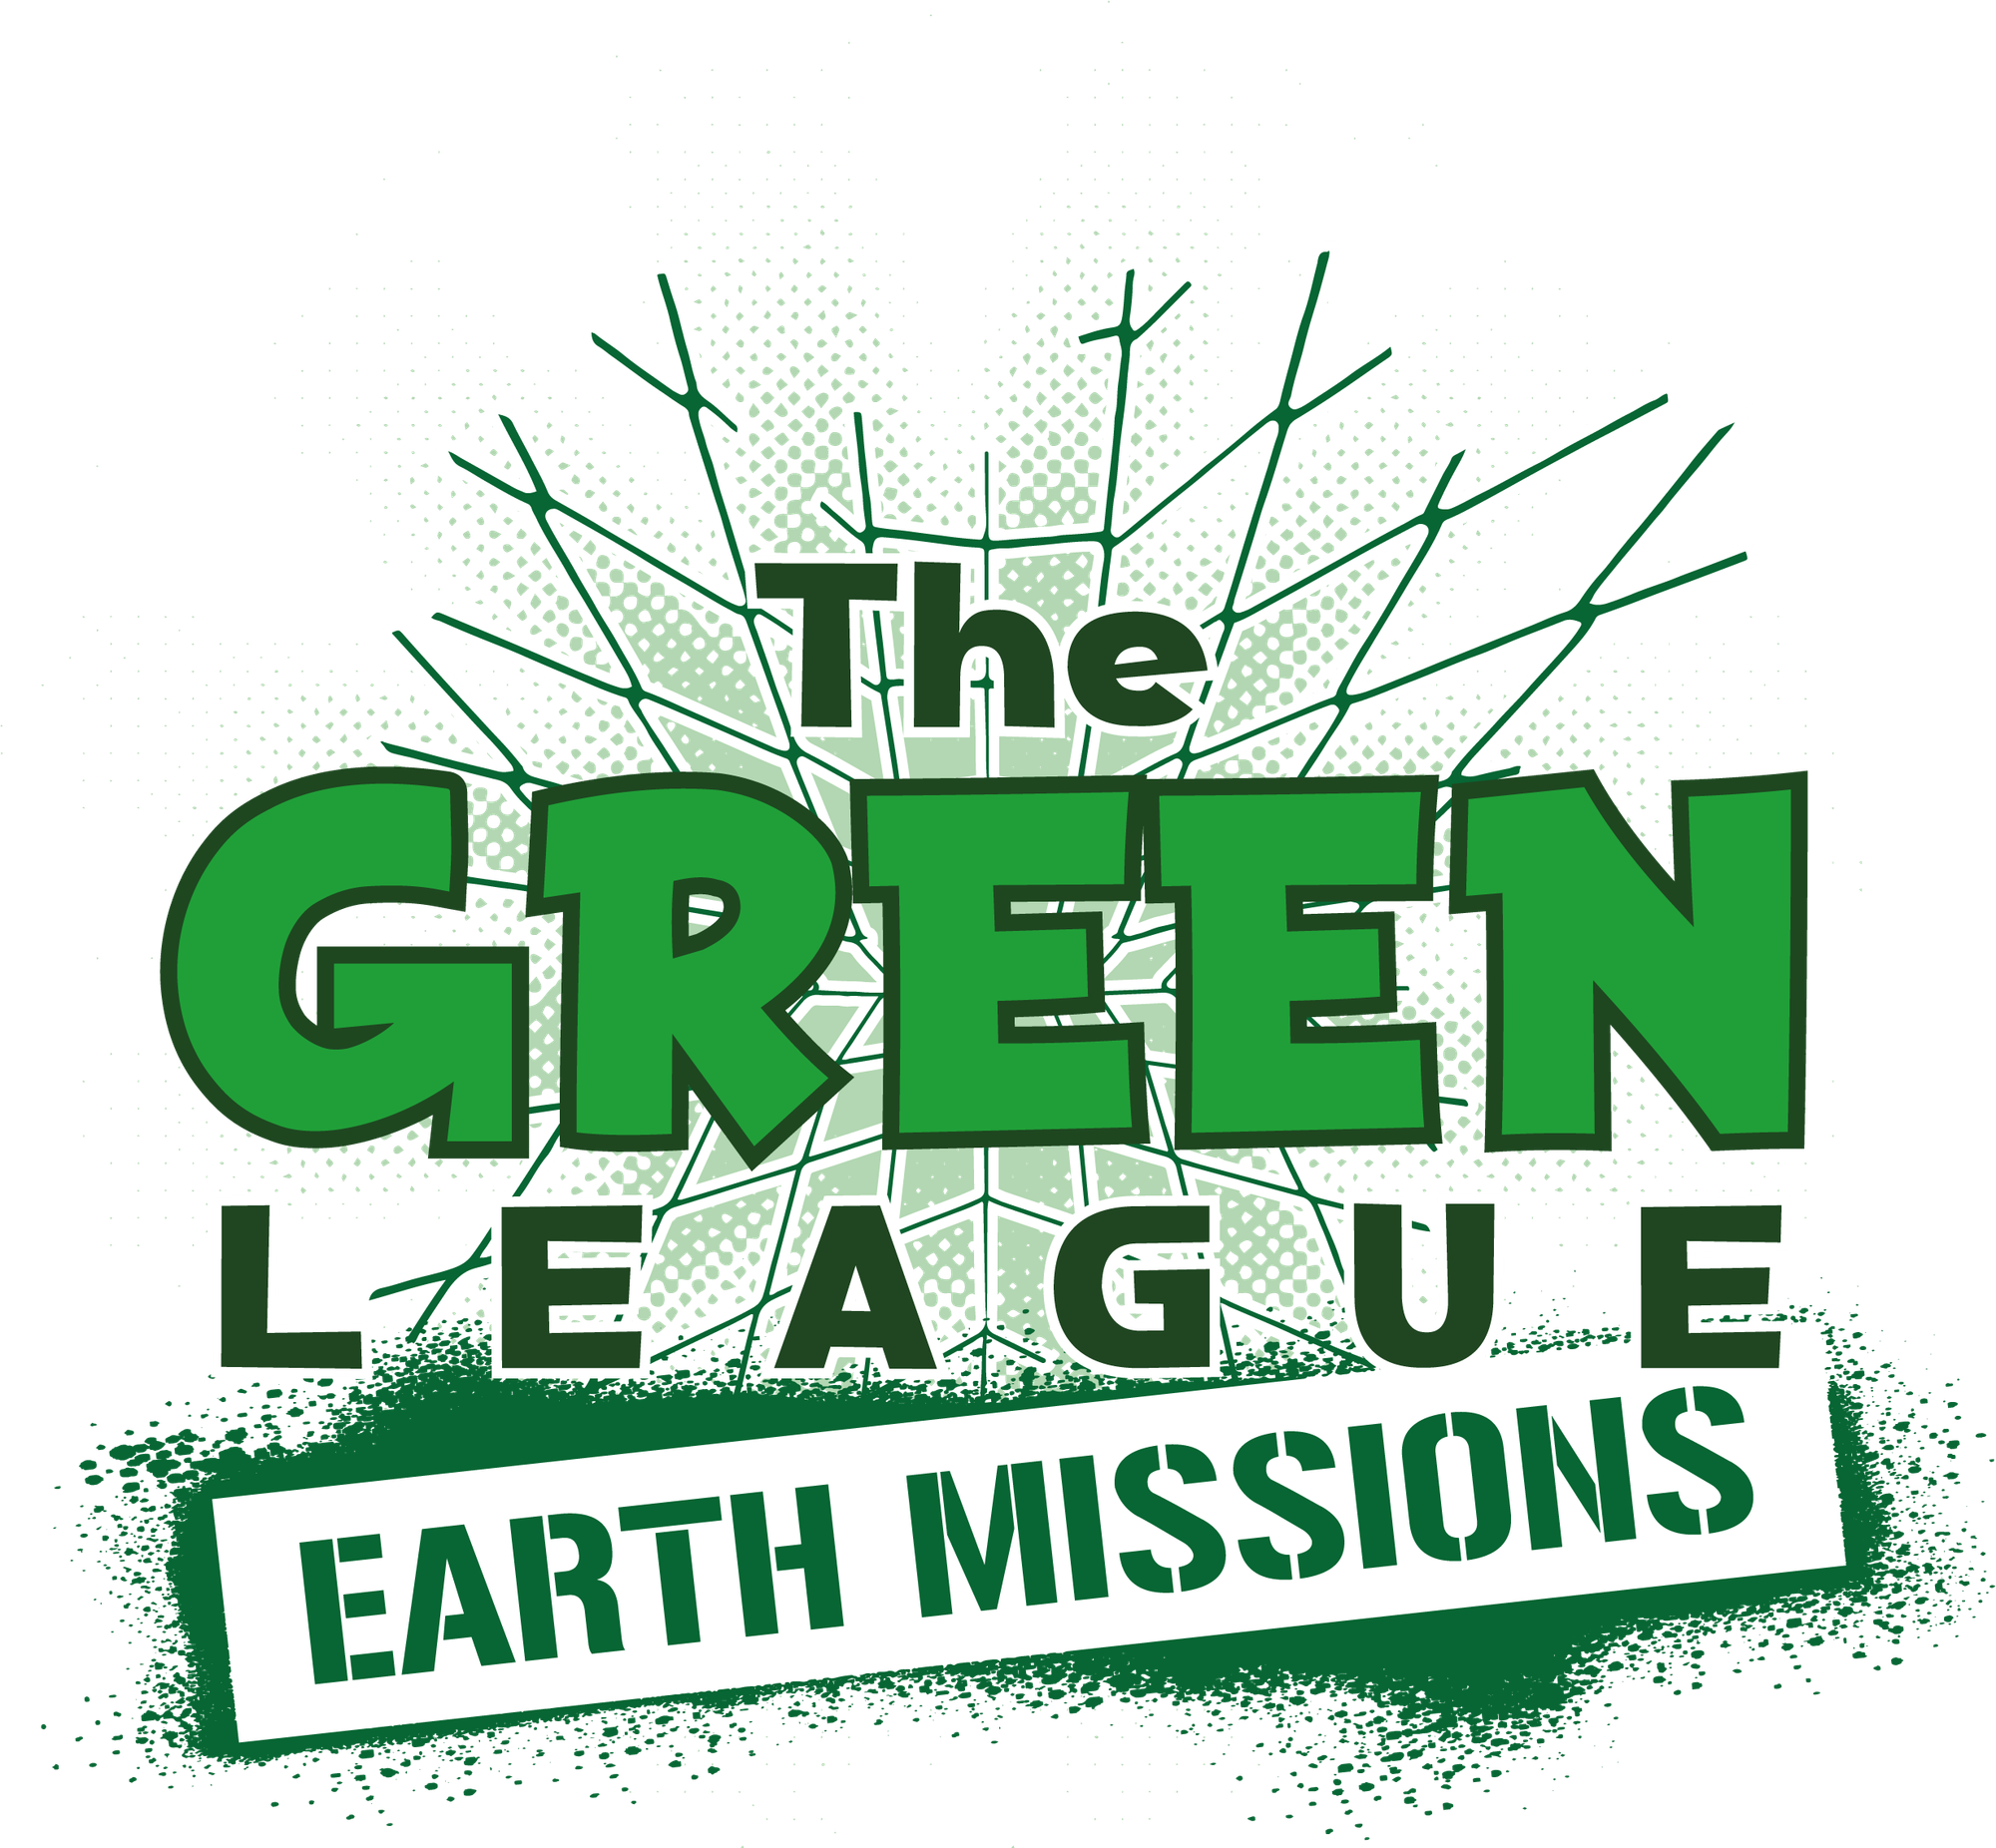 WELCOME TO THE GREEN LEAGUE